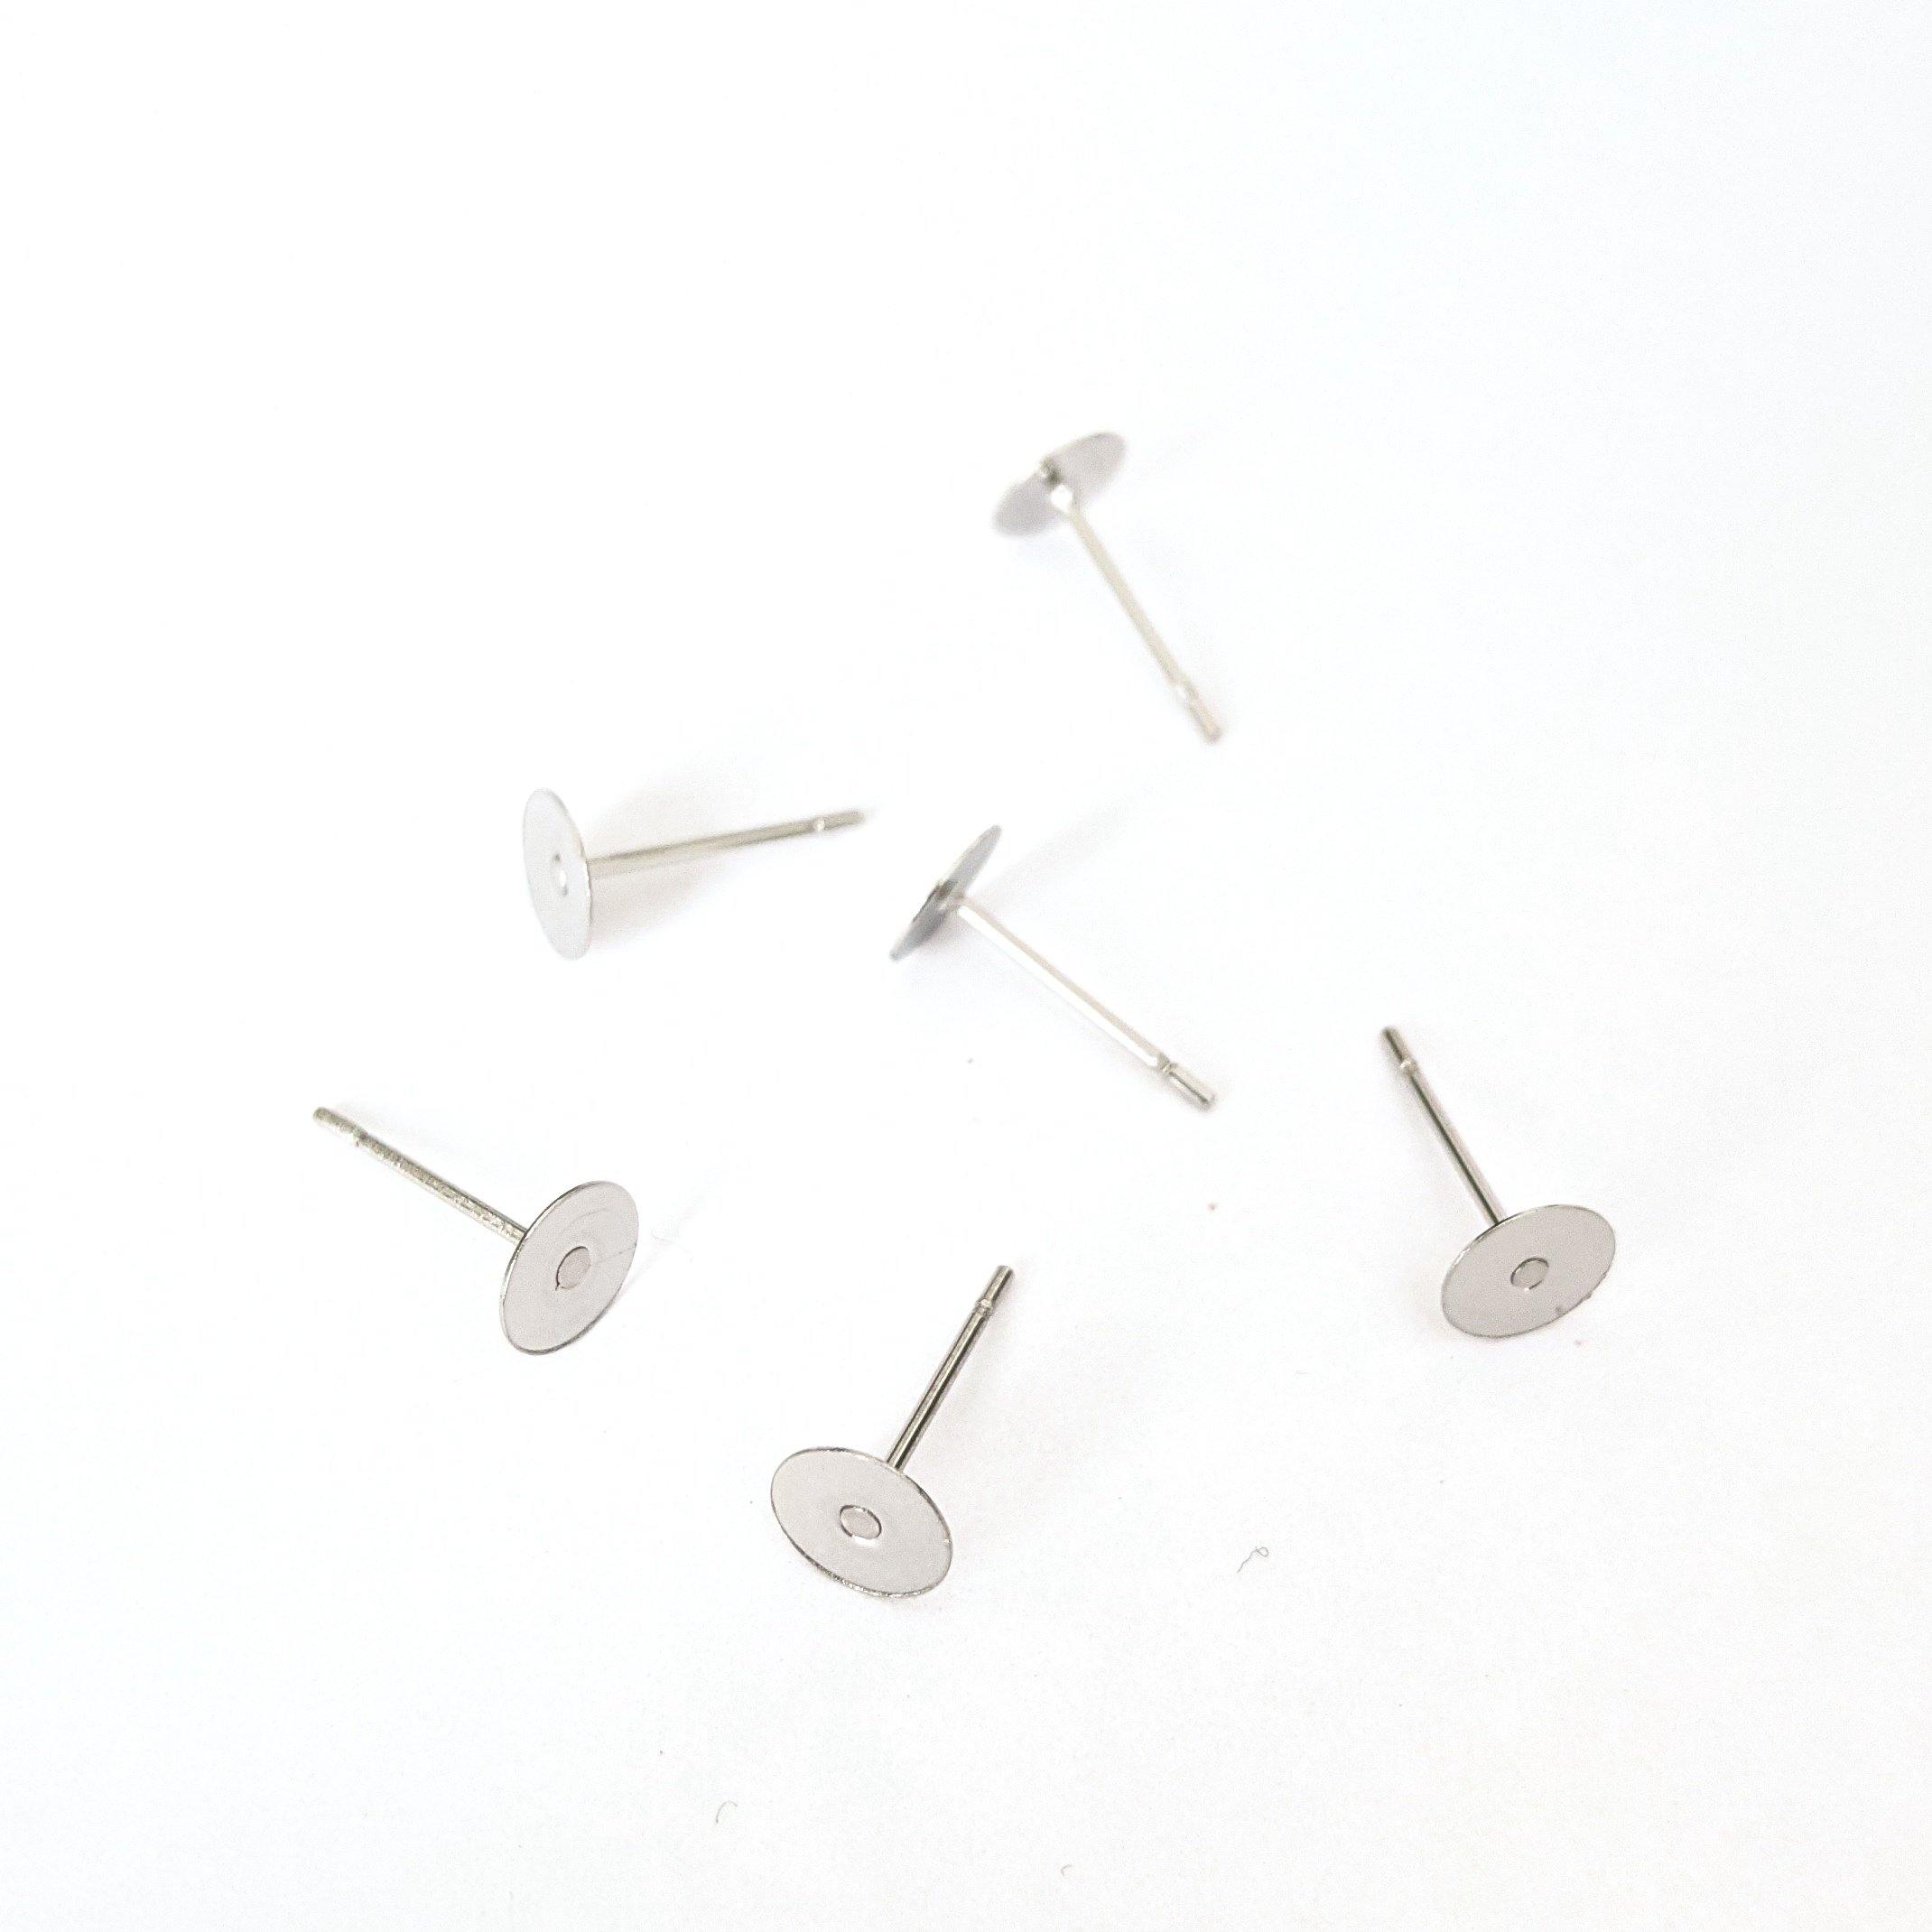 6mm Rhodium coloured stainless steel earring posts - 50 pieces - Poethan